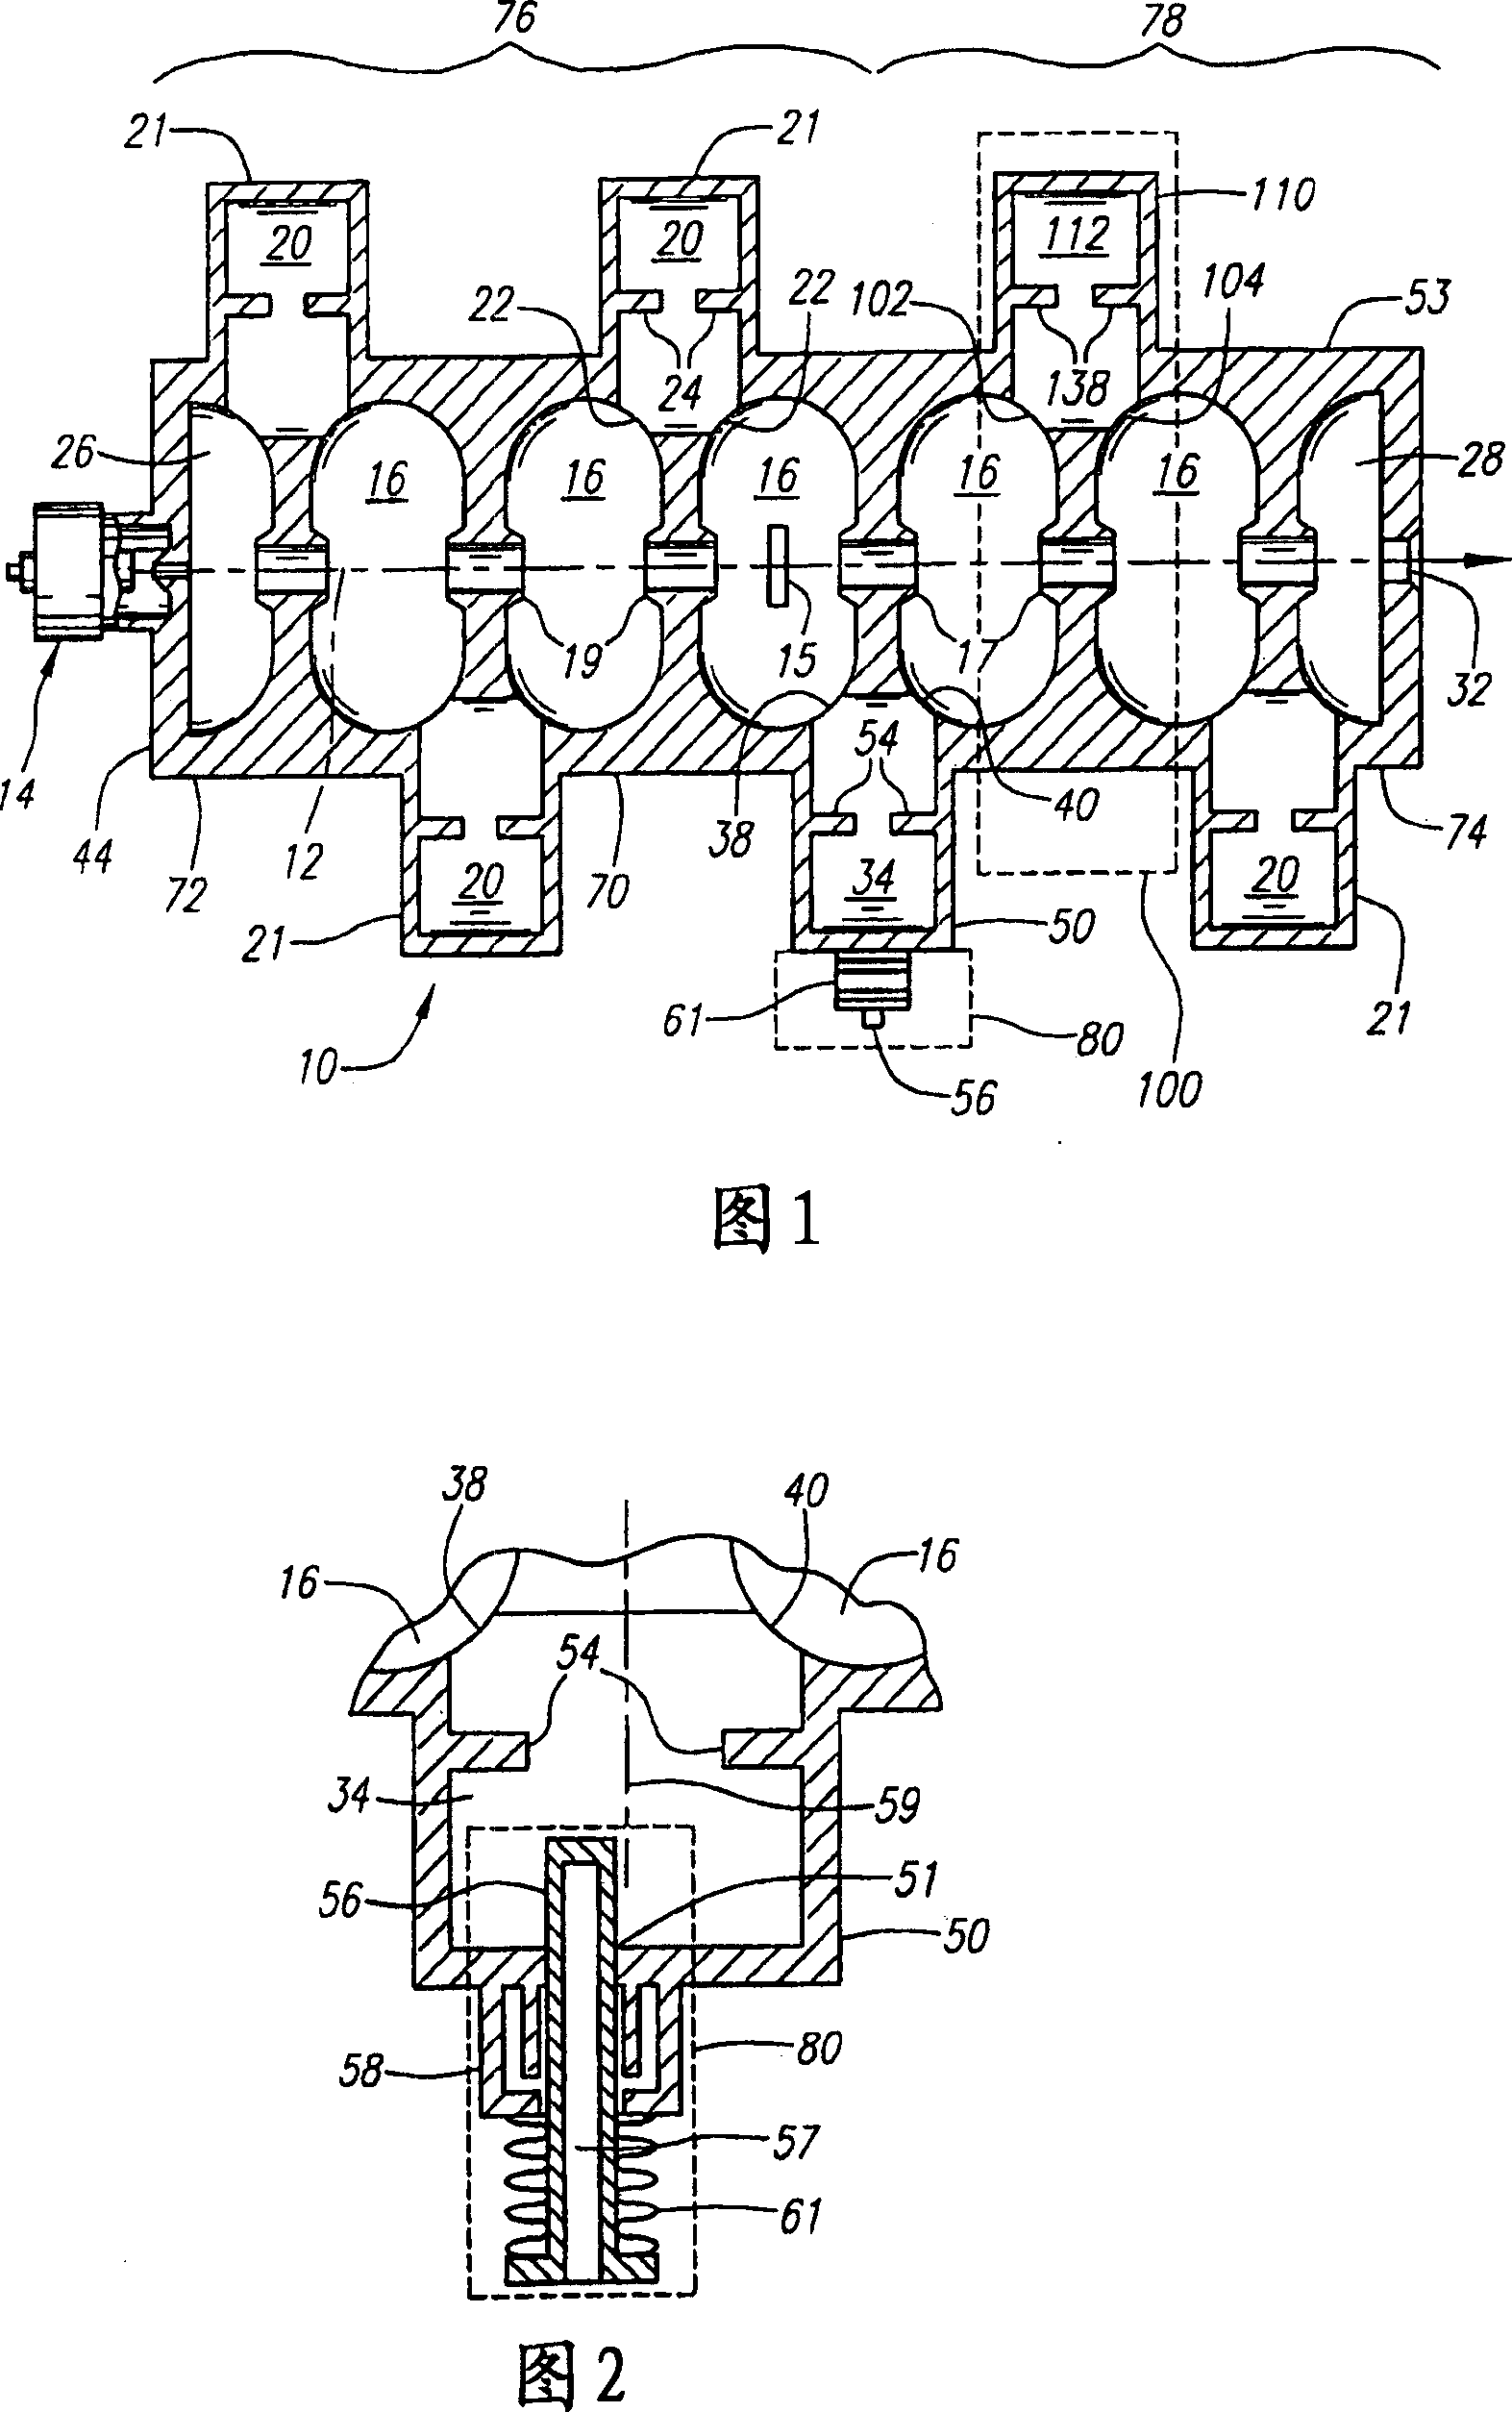 Standing wave particle beam accelerator